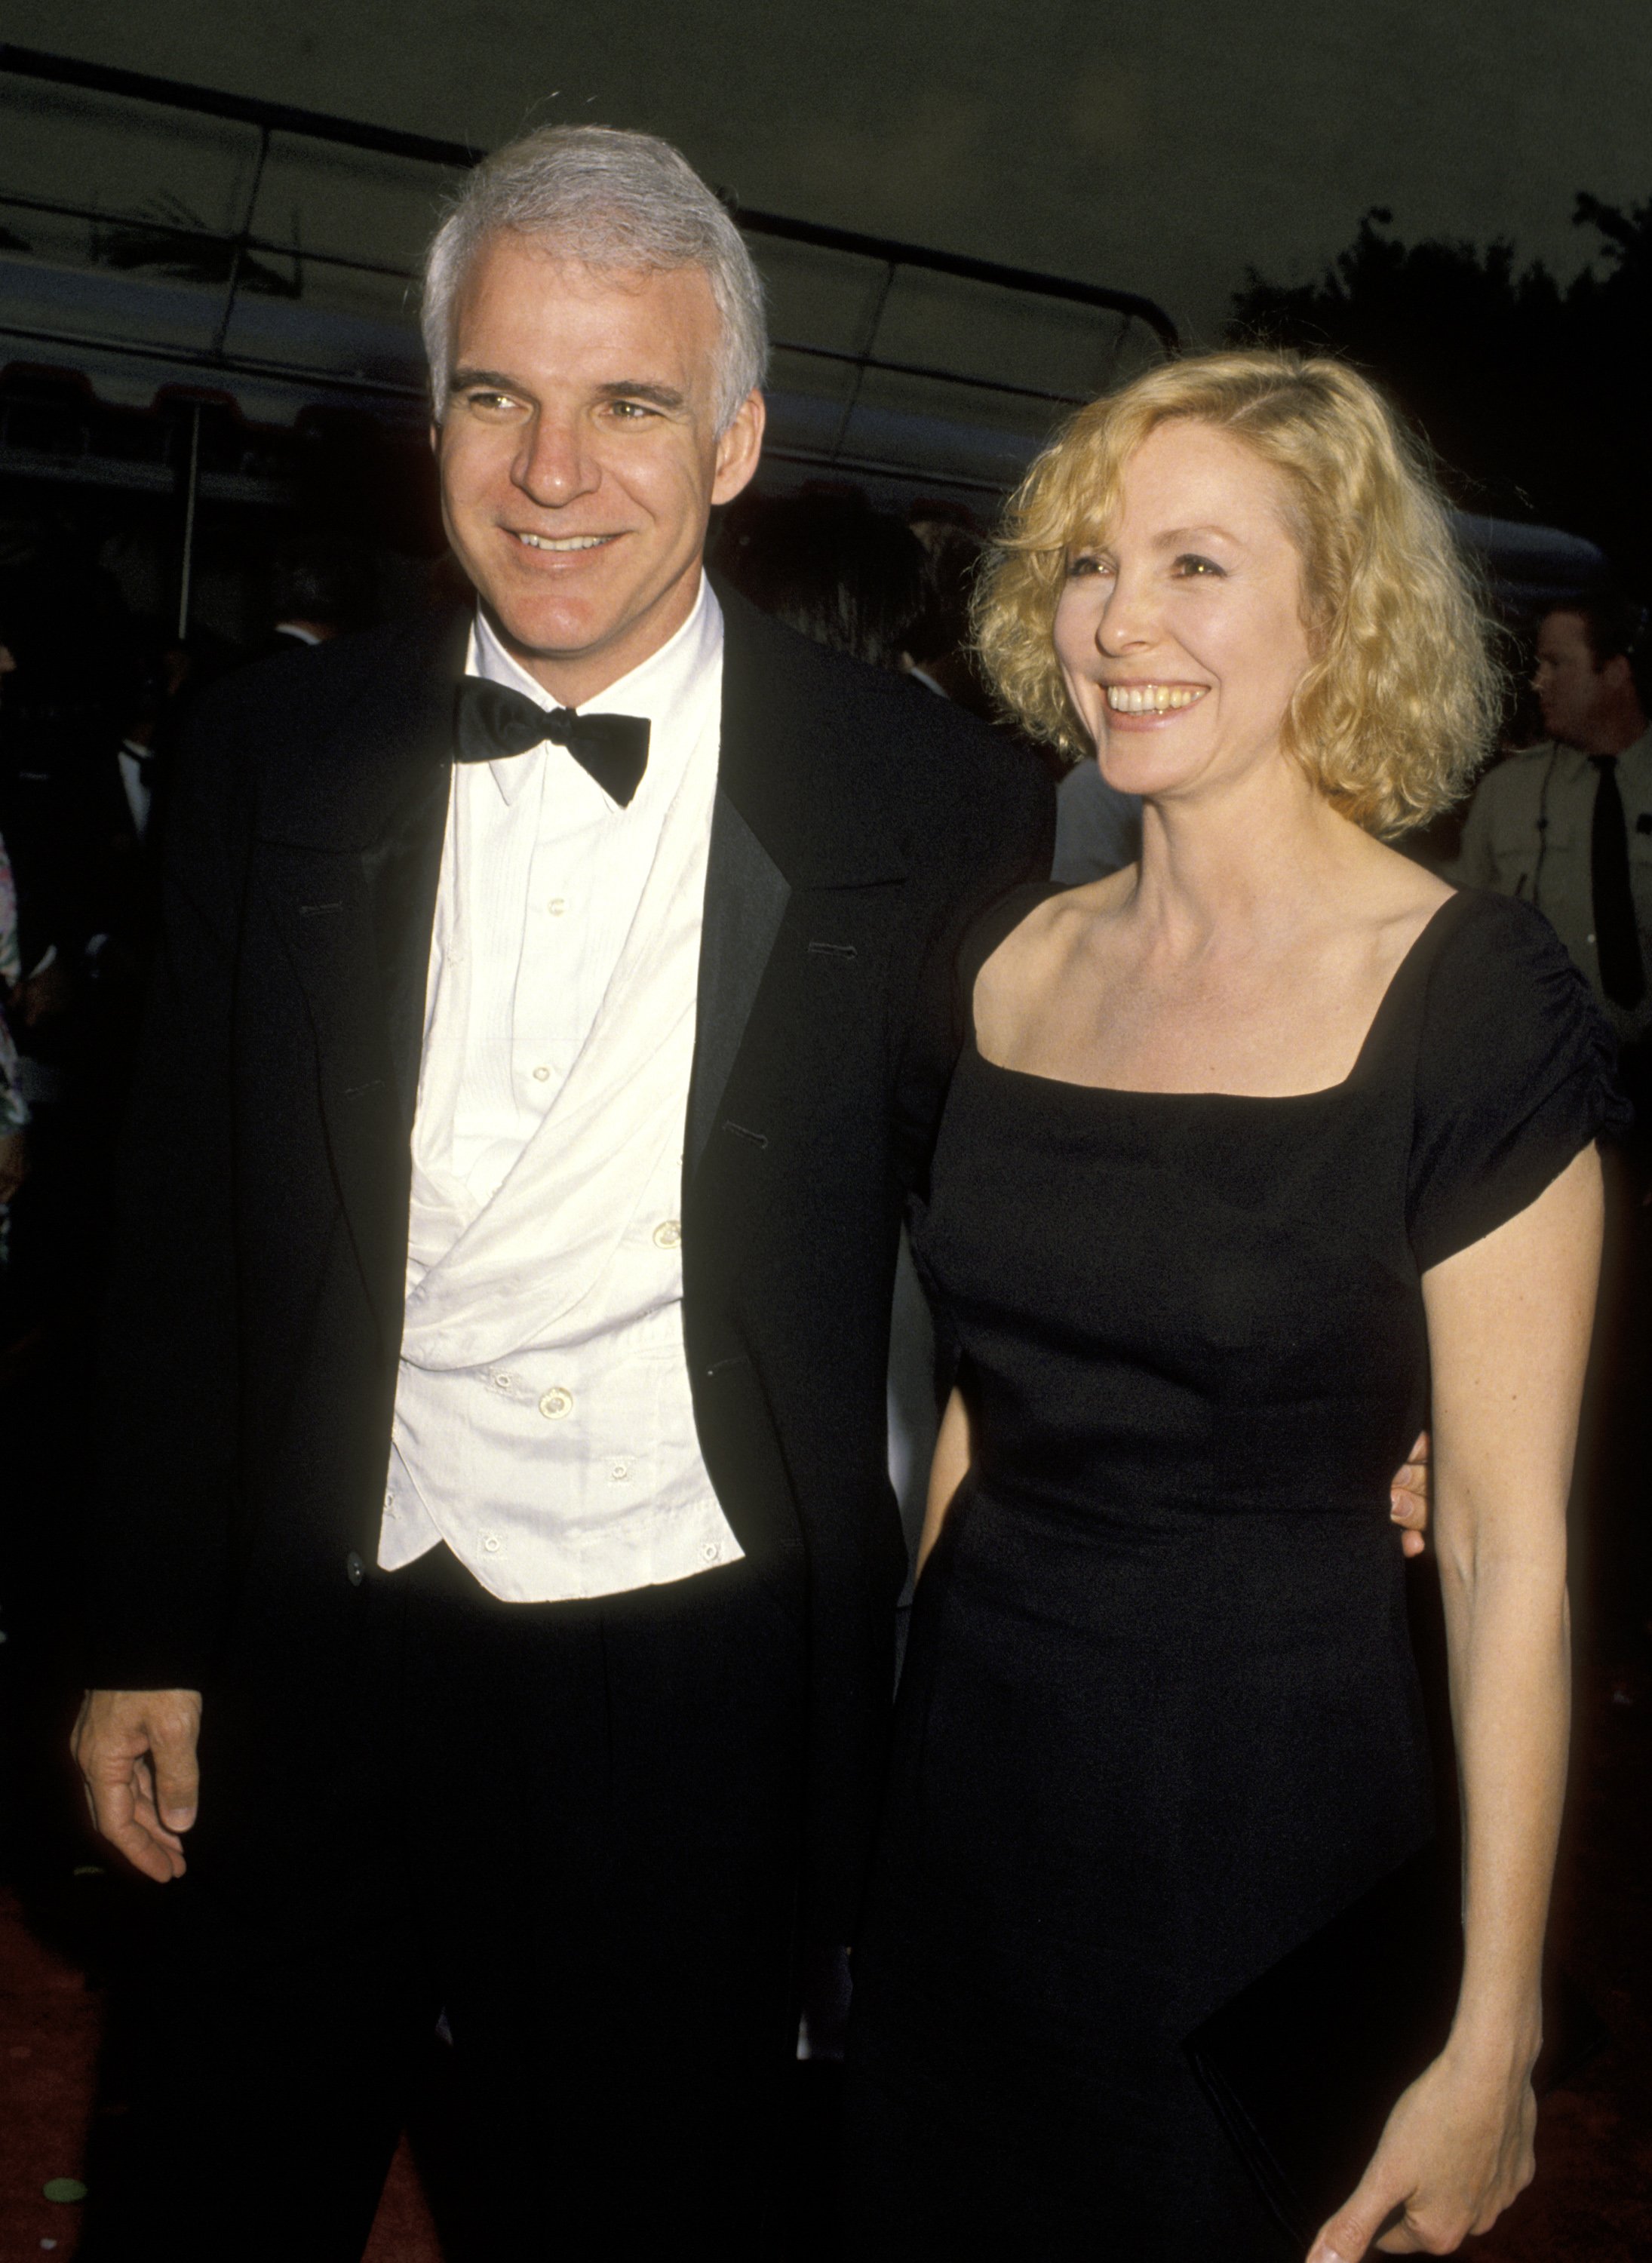 Steve Martin and Victoria Tennant during "Celebration of Tradition," A Gala Event Gathering Warner Bros. Stars - on June 2, 1990, in Burbank, California | Source: Getty Images